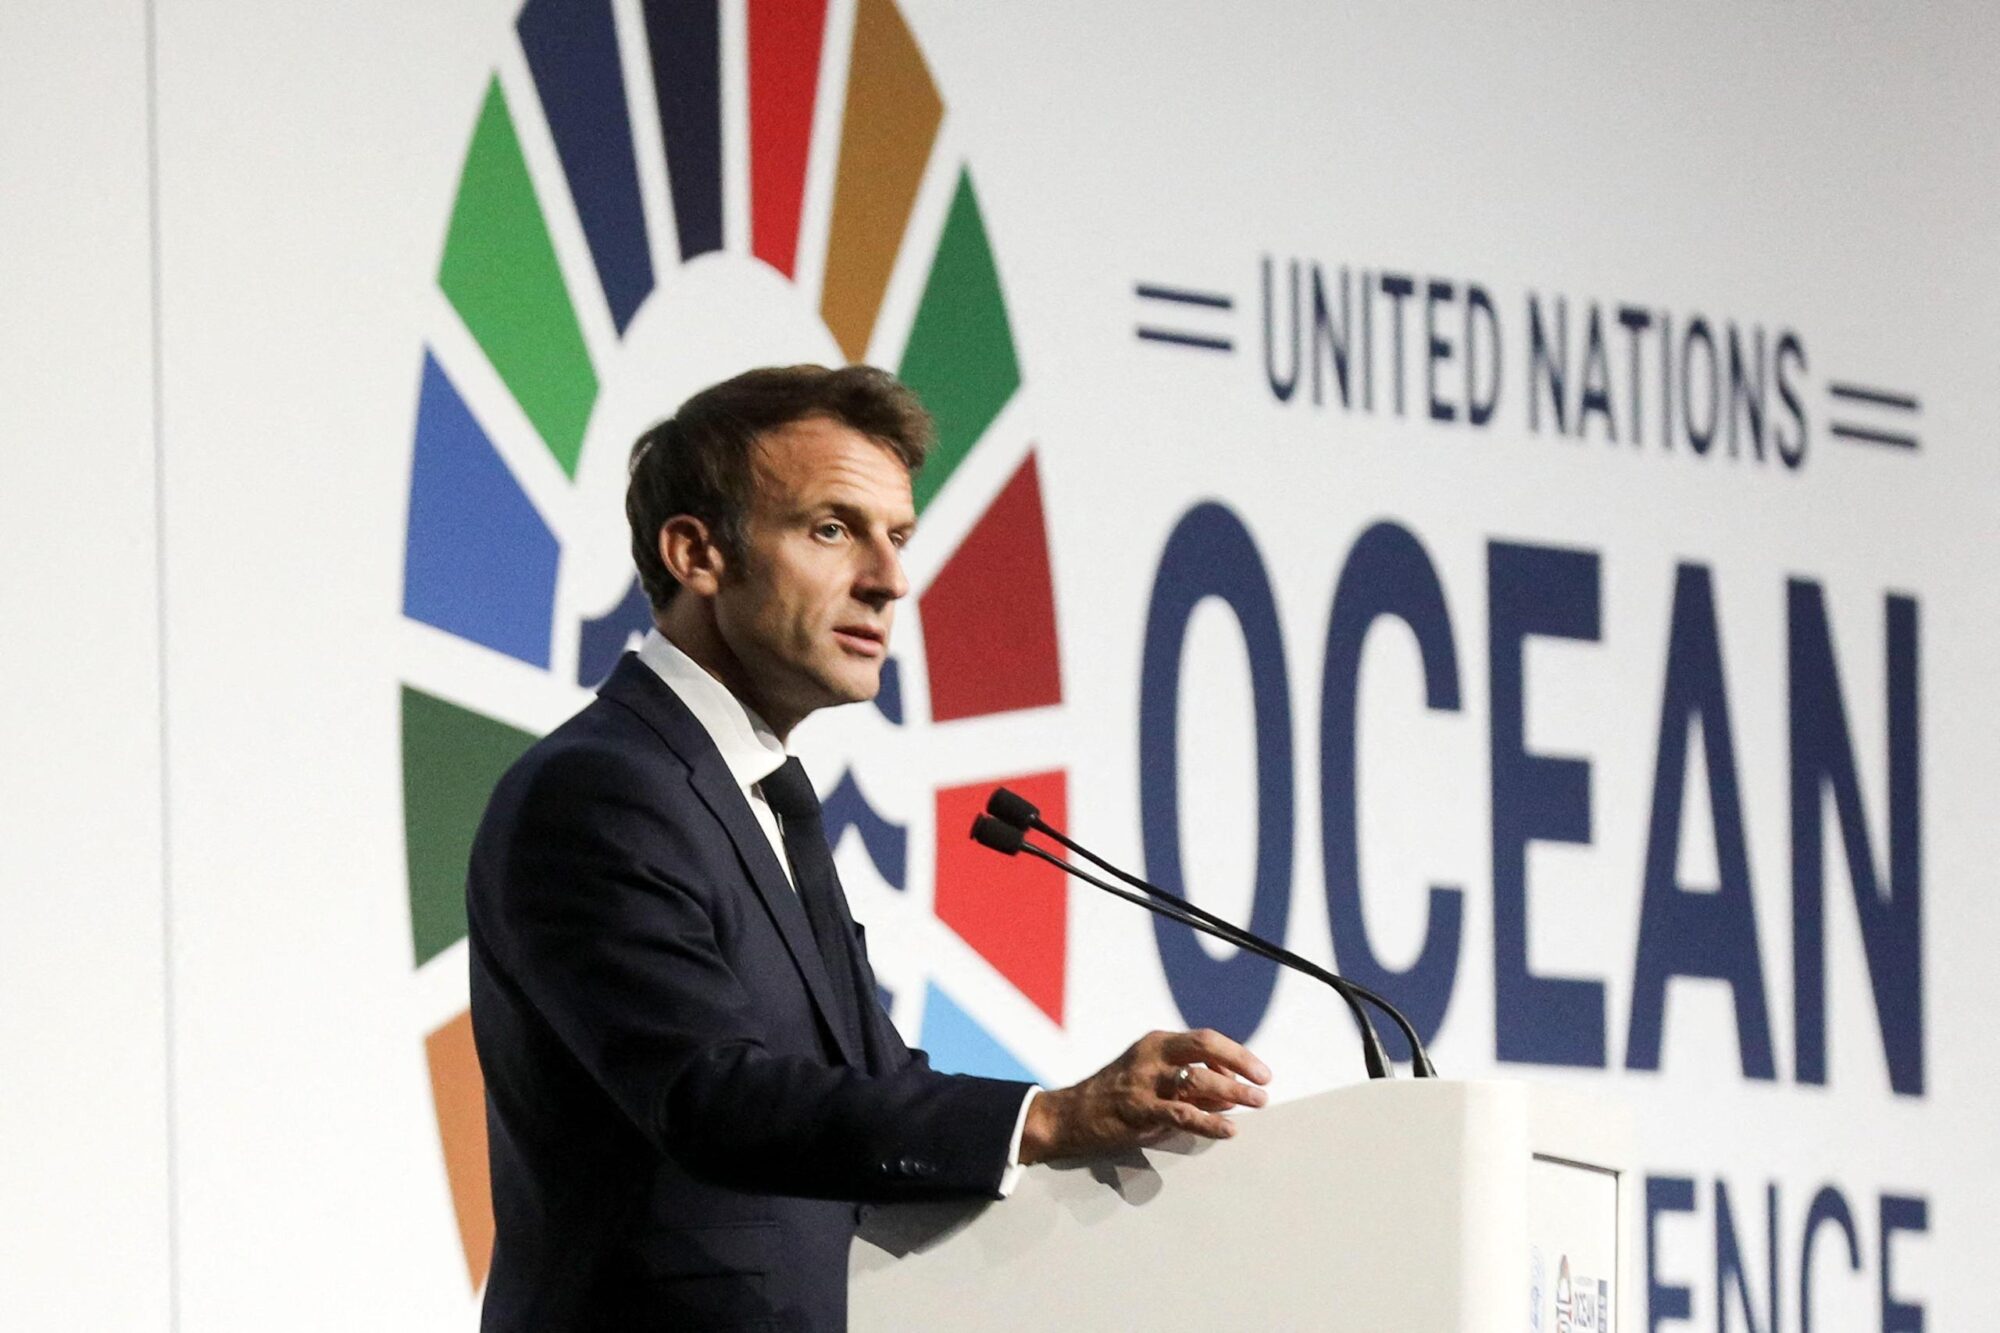 Emmanuel Macron at the UN Oceans Conference in front of a microphone